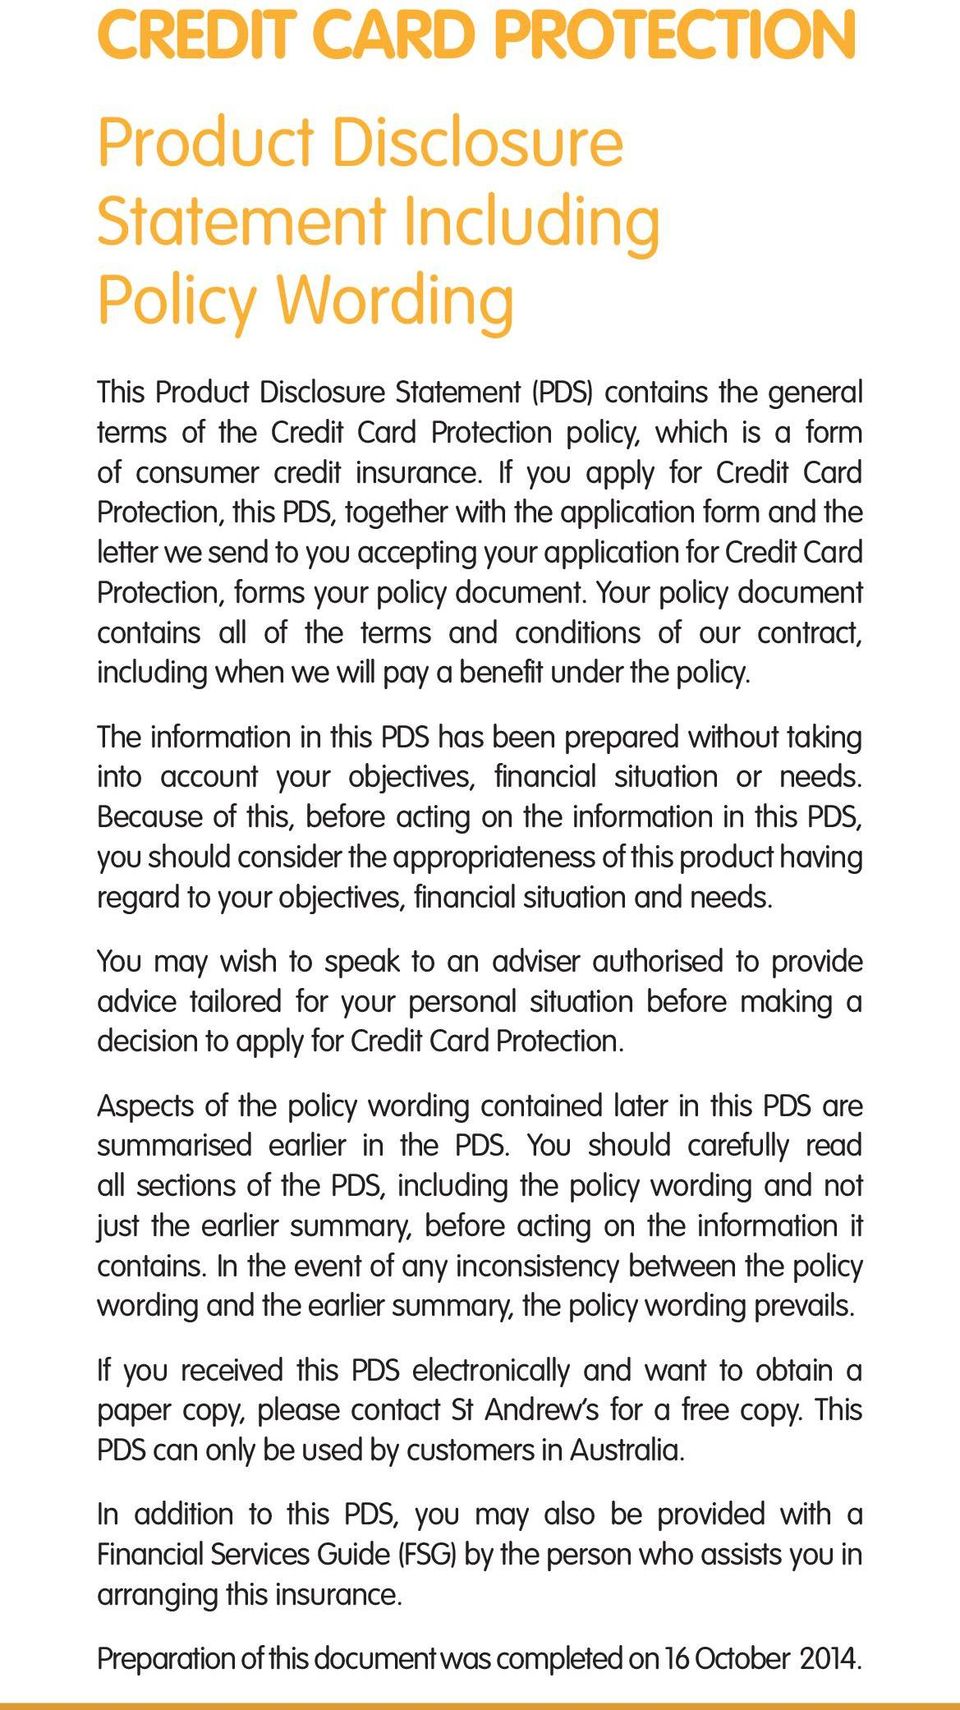 If you apply for Credit Card Protection, this PDS, together with the application form and the letter we send to you accepting your application for Credit Card Protection, forms your policy document.